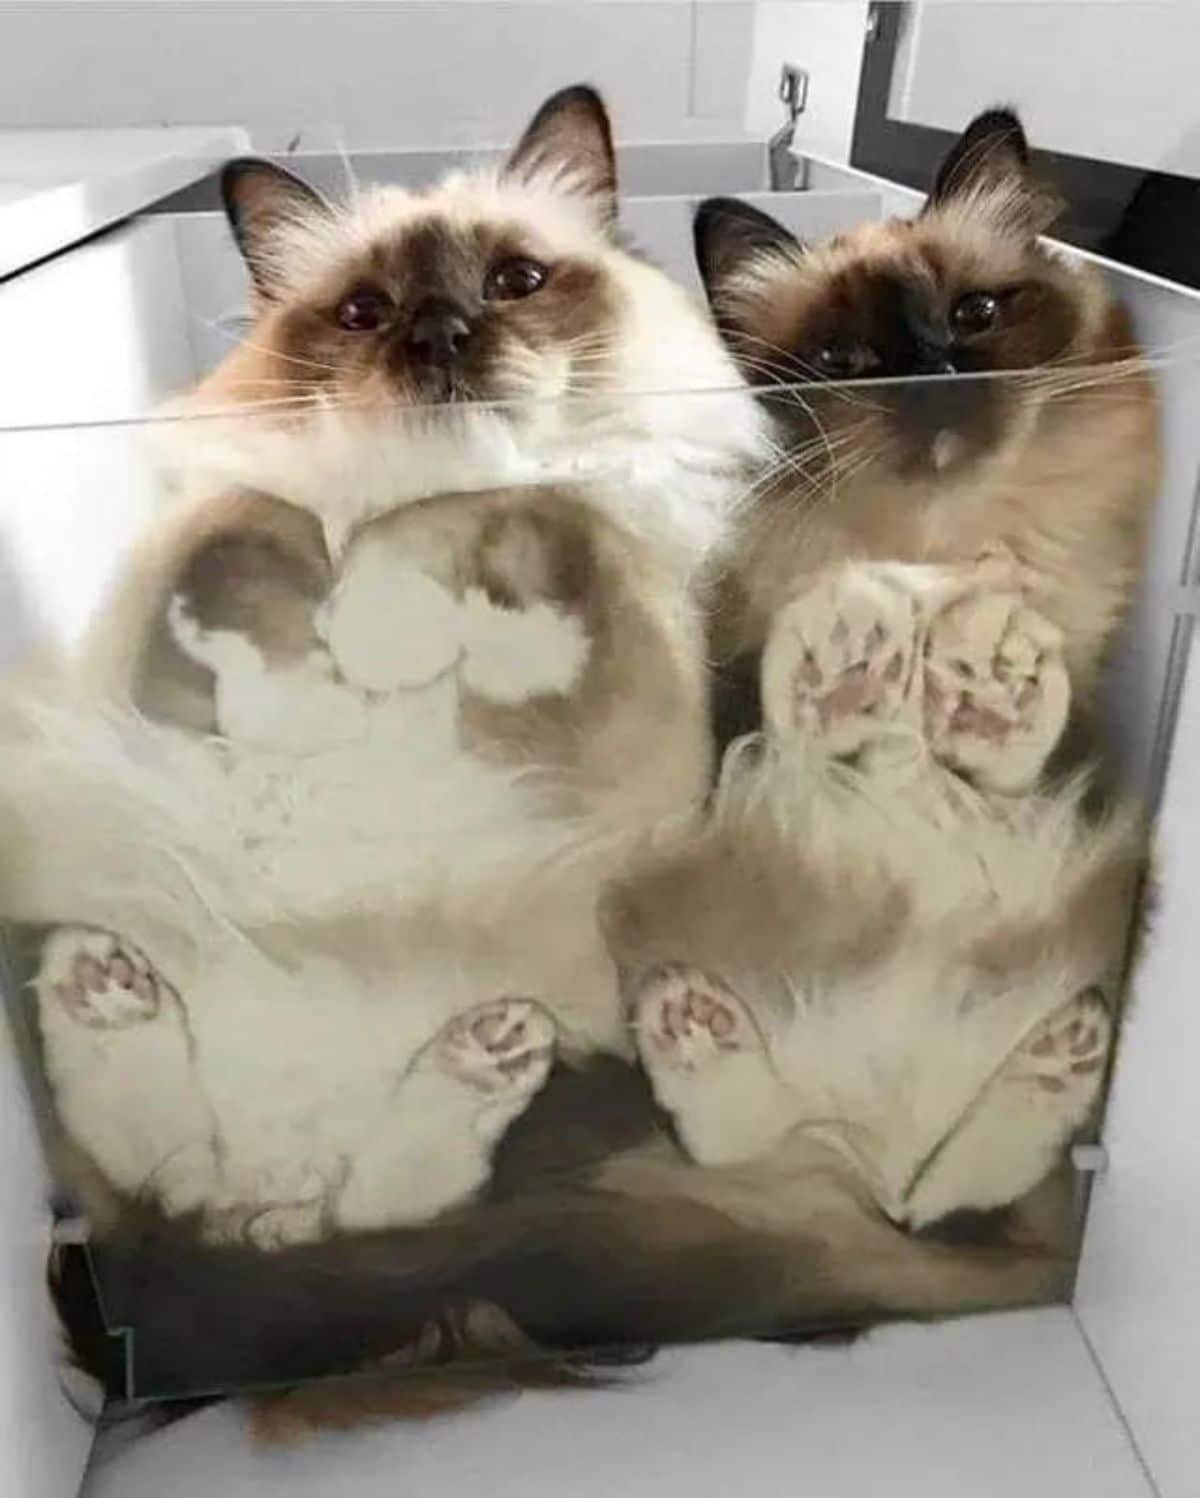 2 fluffy white and brown siamese cats laying inside a glass container with the paws resting on the glass